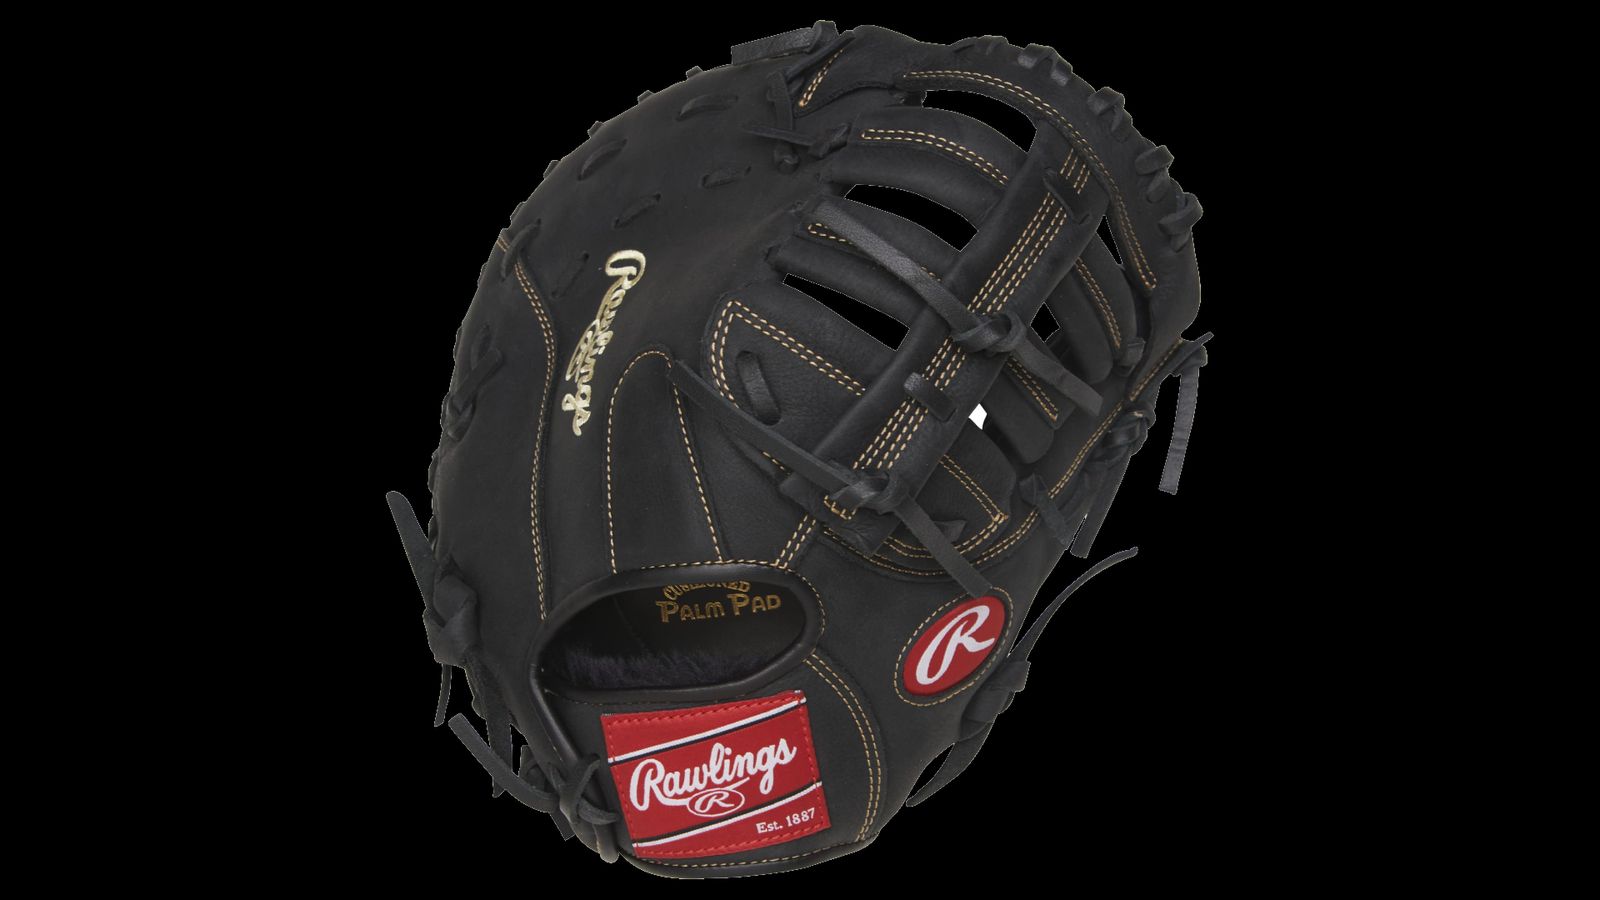 Rawlings Renegade product image of a black glove with red accents and brown stitching.